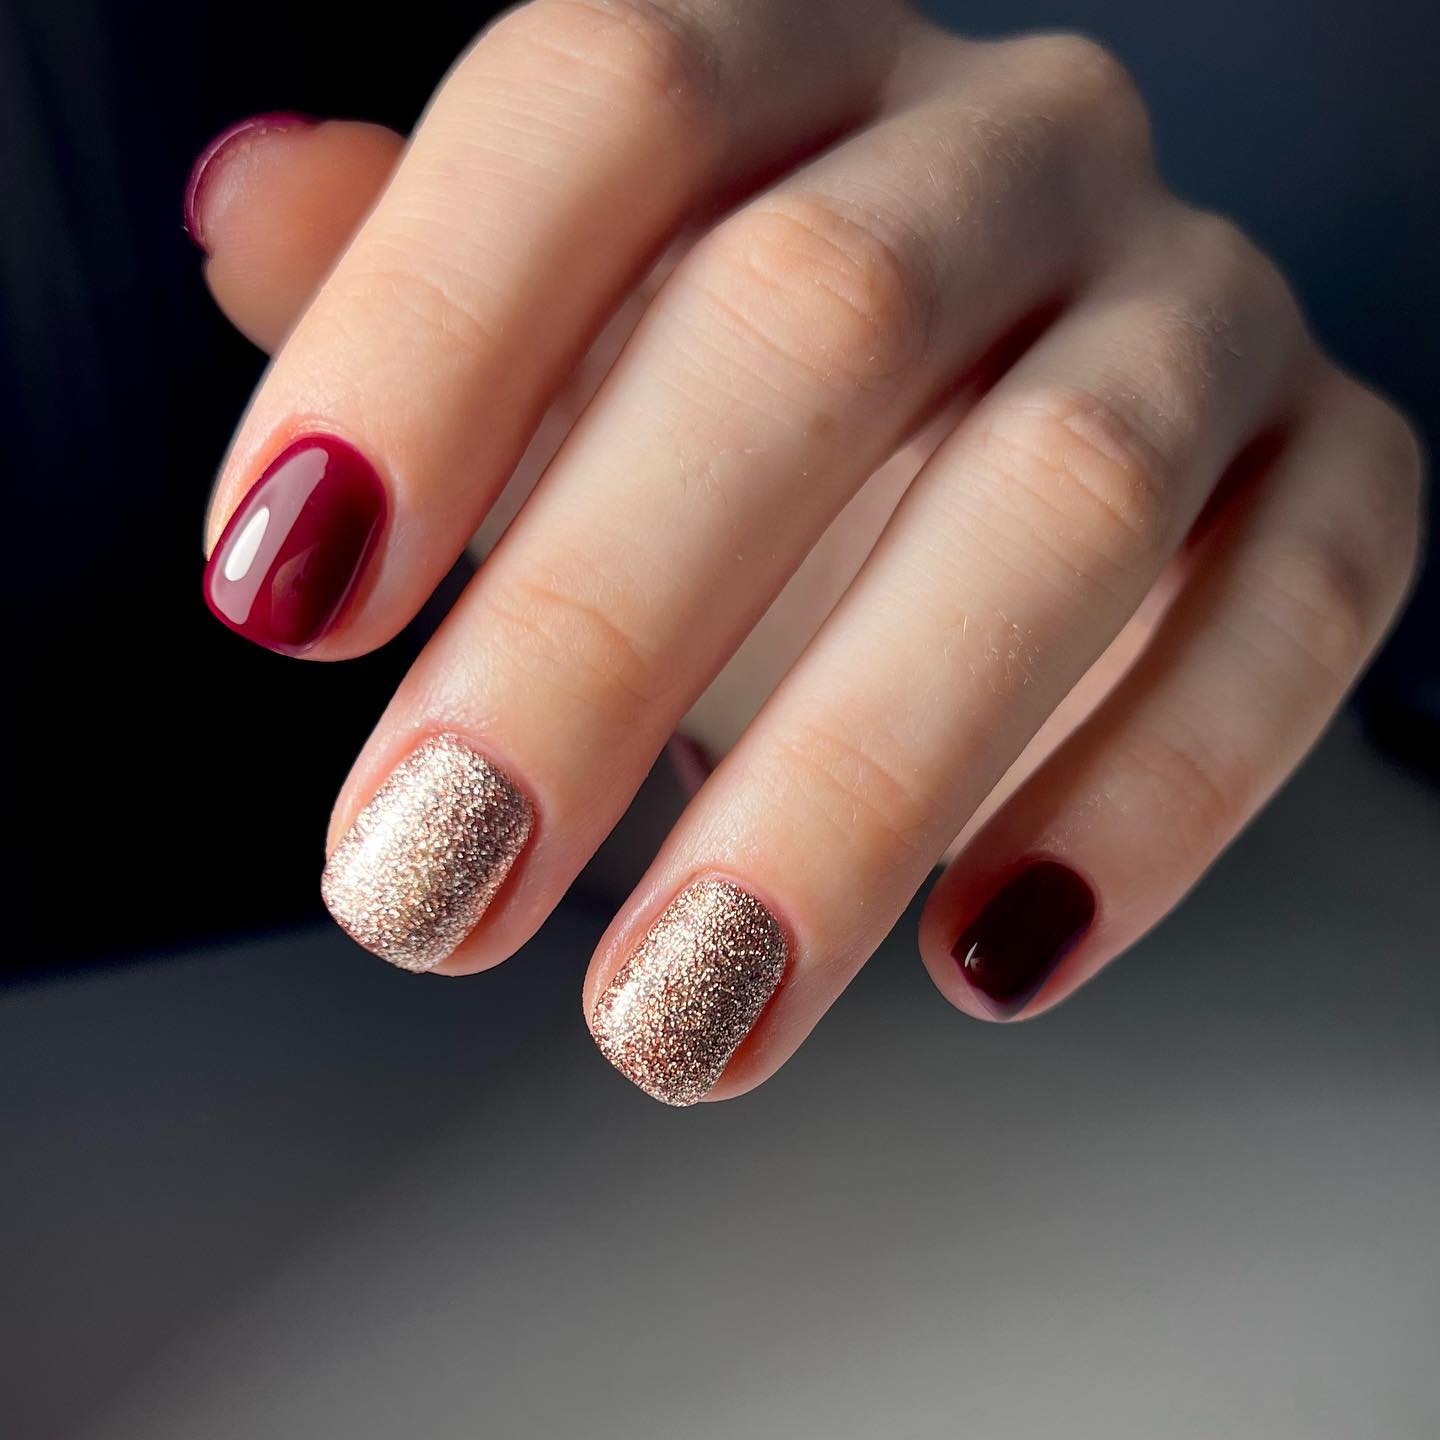 Burgundy Nails: 45 Nail Designs For Different Shapes & Shopping Ideas